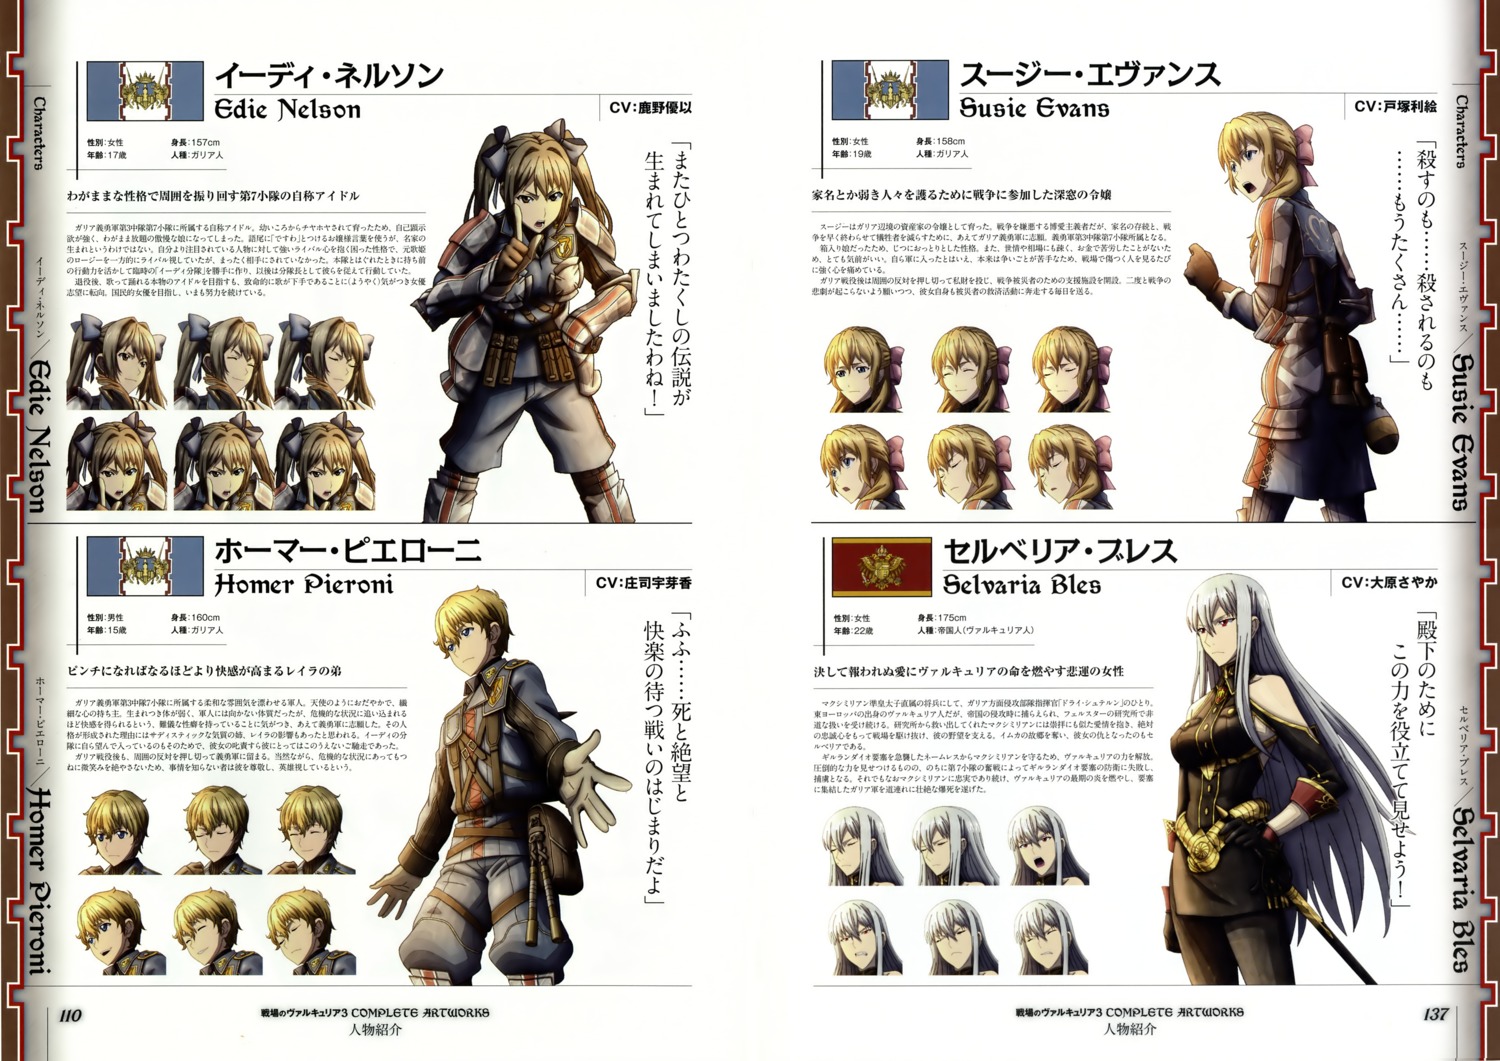 edy_nelson expression profile_page selvaria_bles uniform valkyria_chronicles